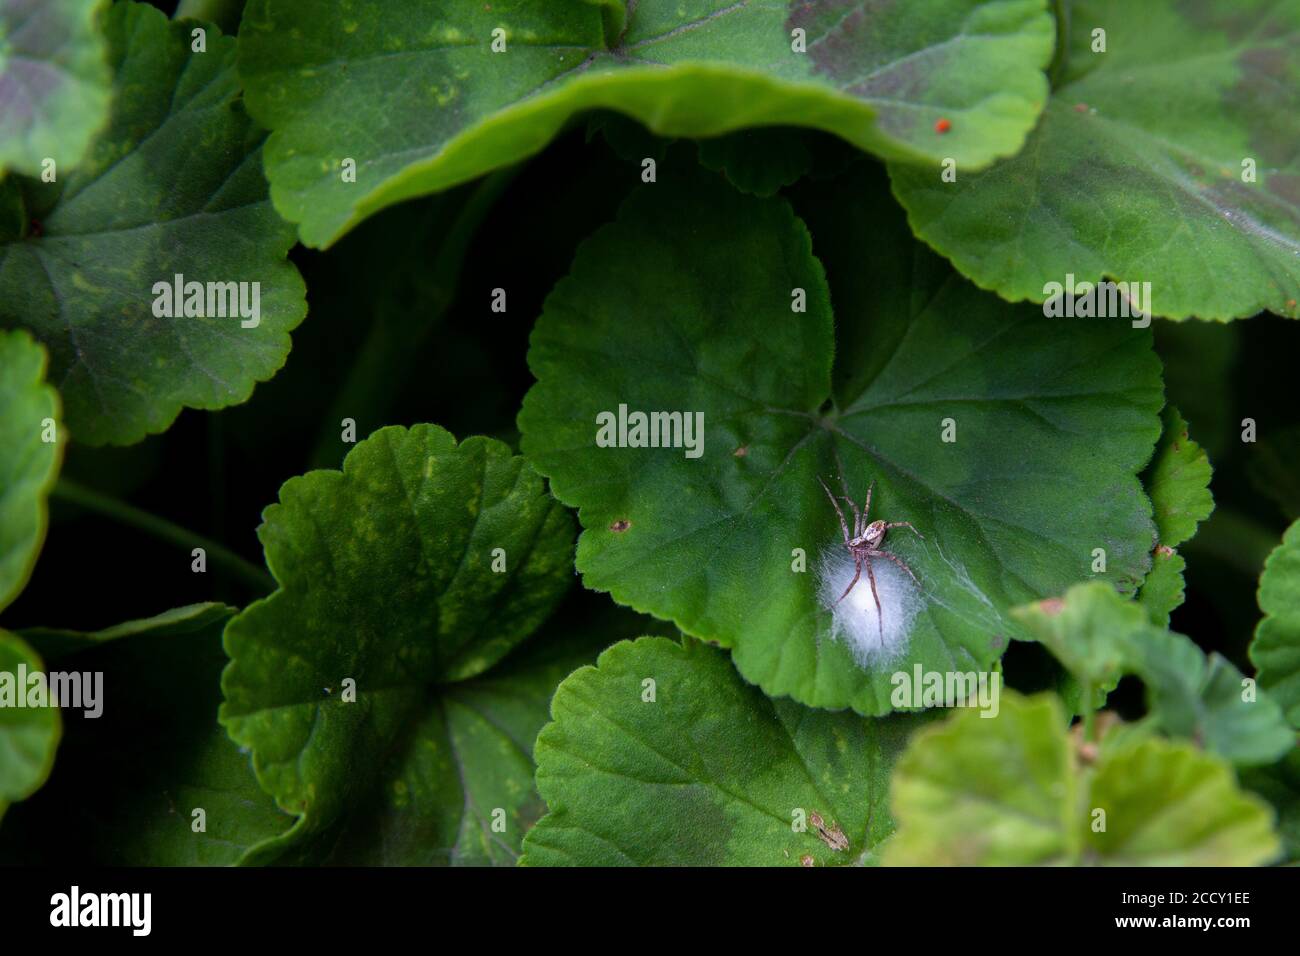 Close up shot of a spider on green geranium leaves protecting its white eggs in a web Stock Photo